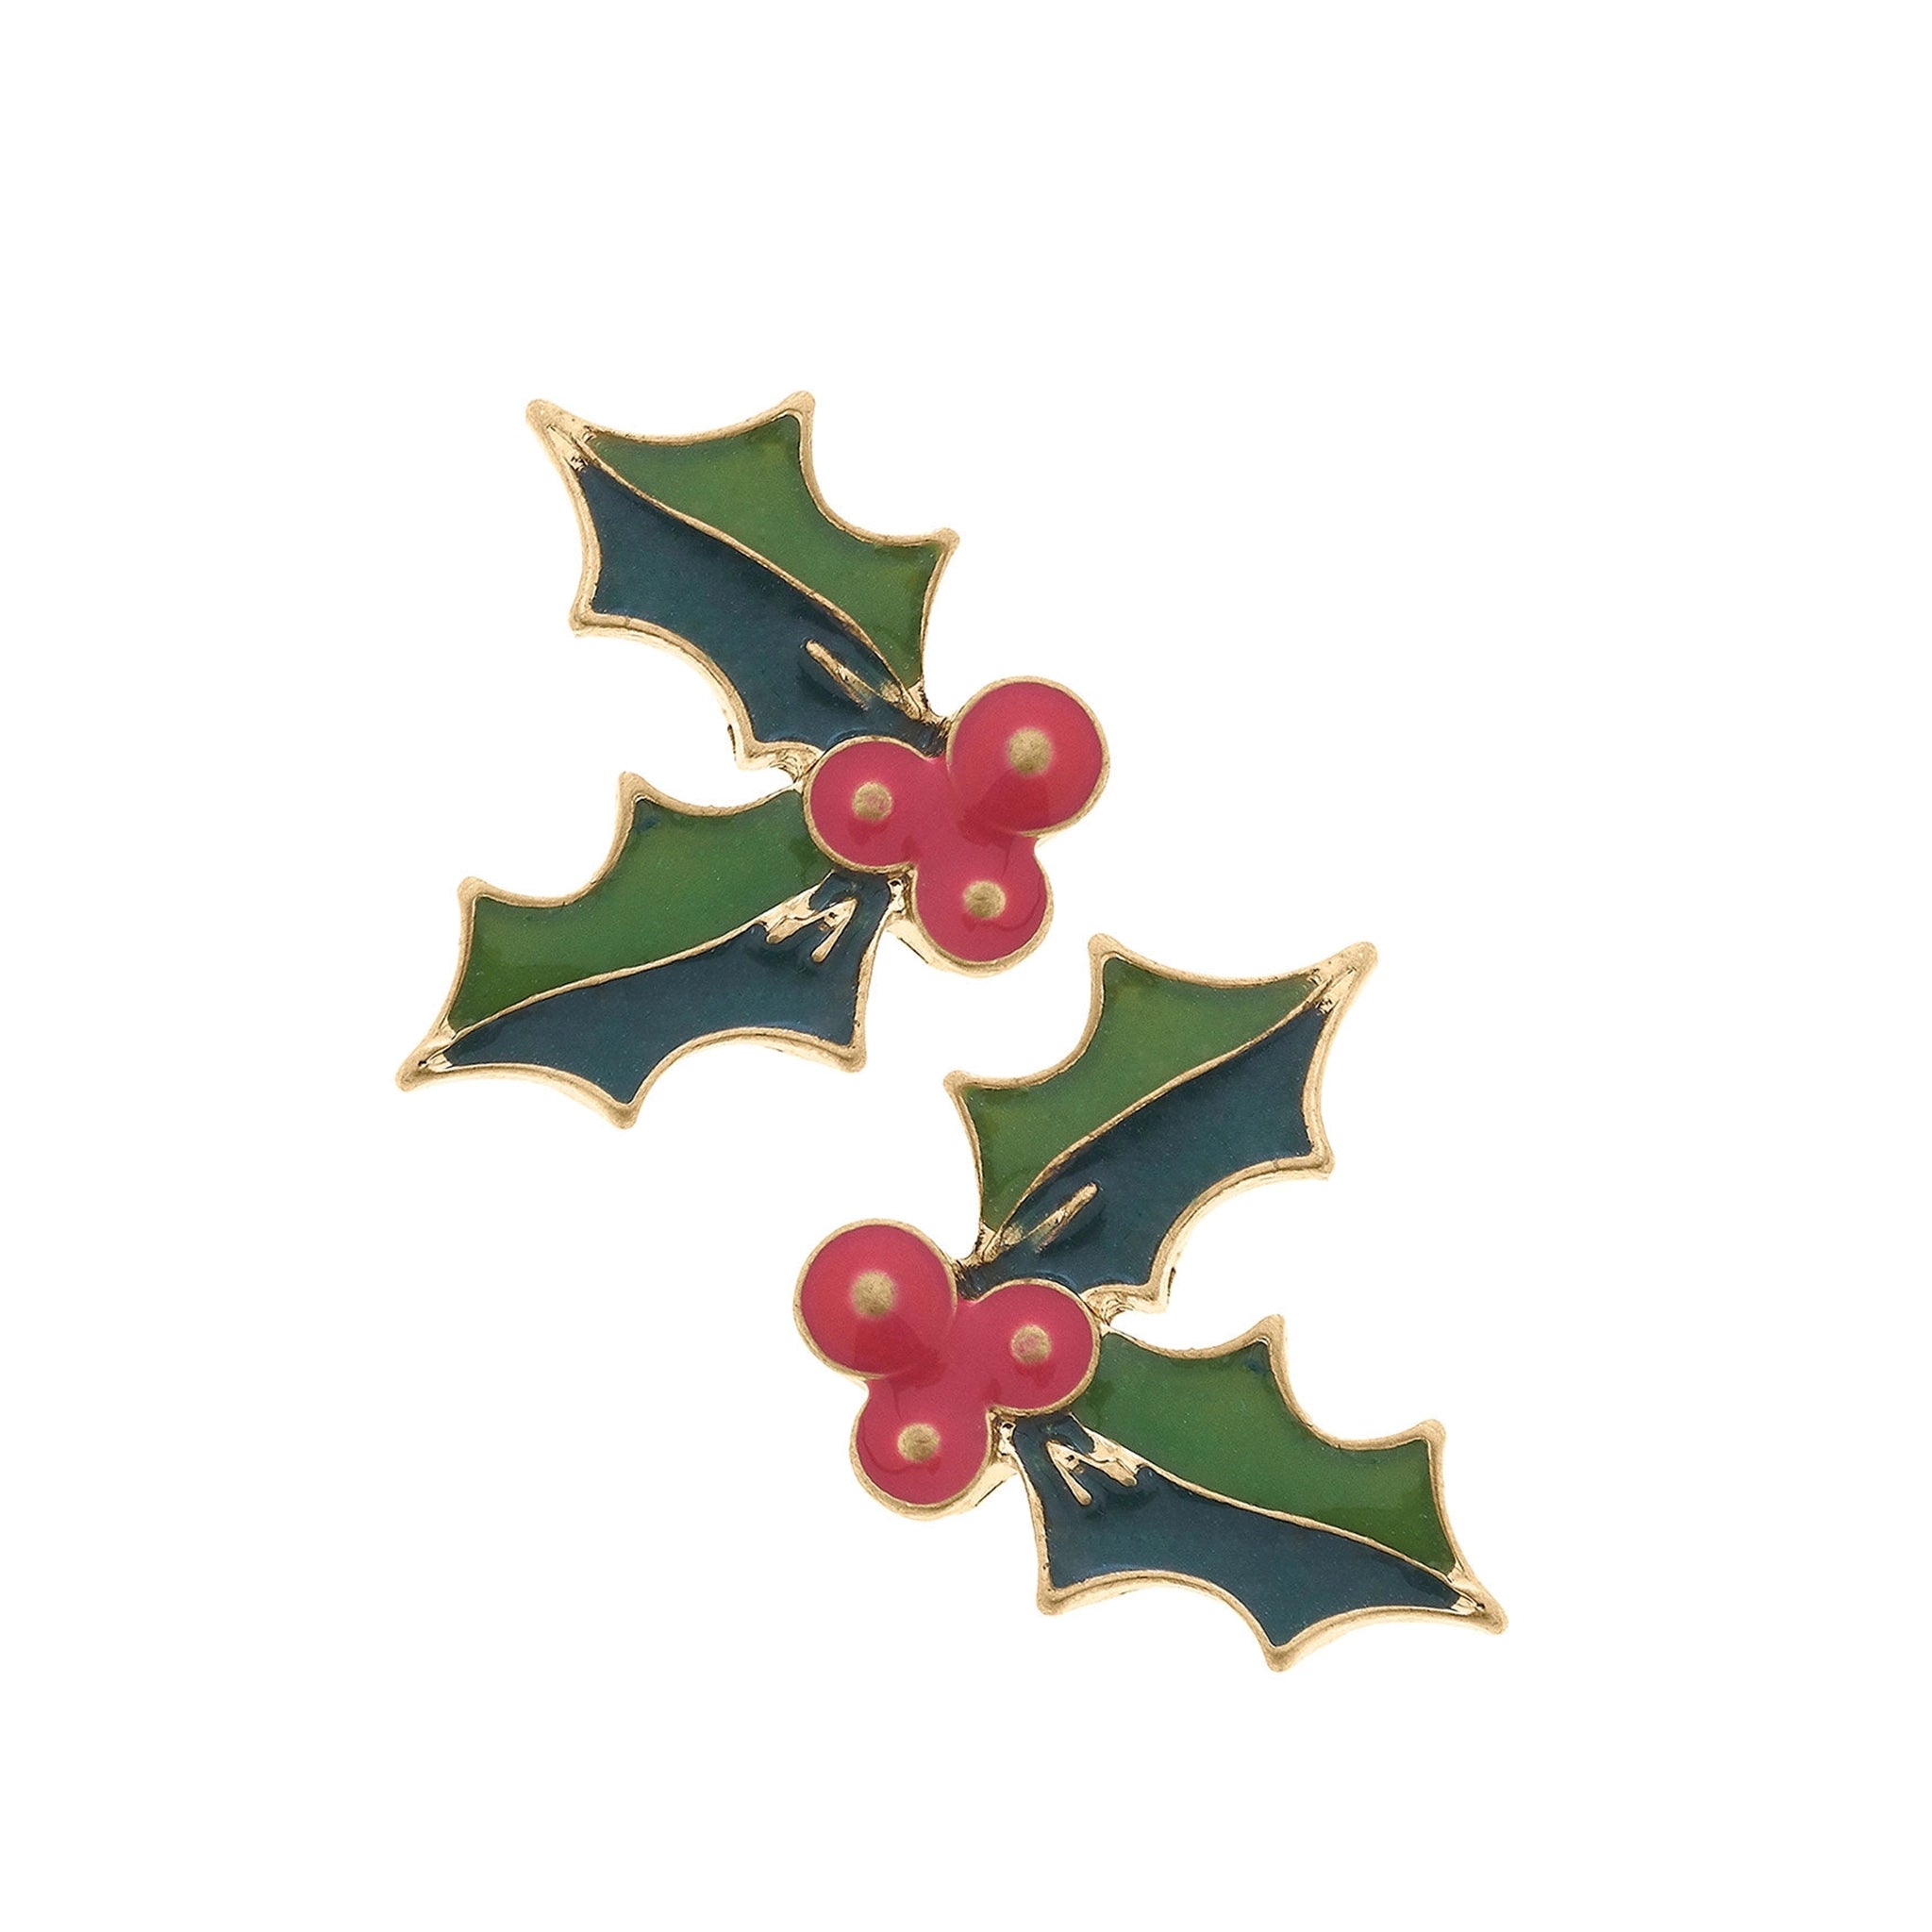 A pair of green and red holly shaped earrings.